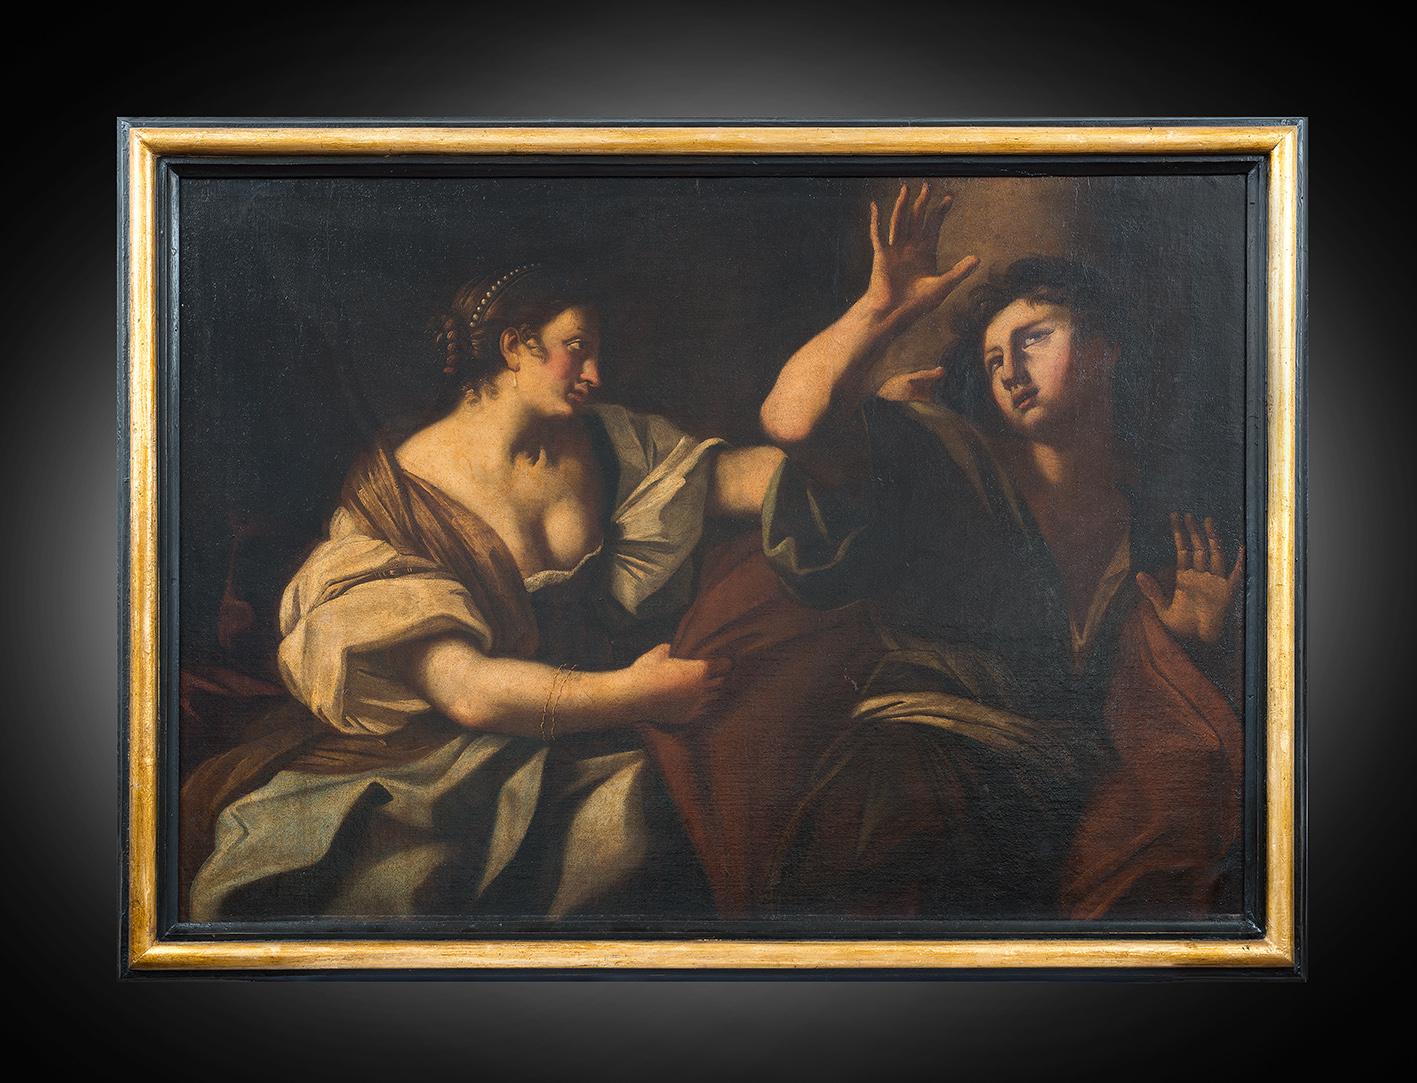 Unknown Figurative Painting - Antique oil-on-canvas painting depicting "Joseph and the Wife of Putifares."